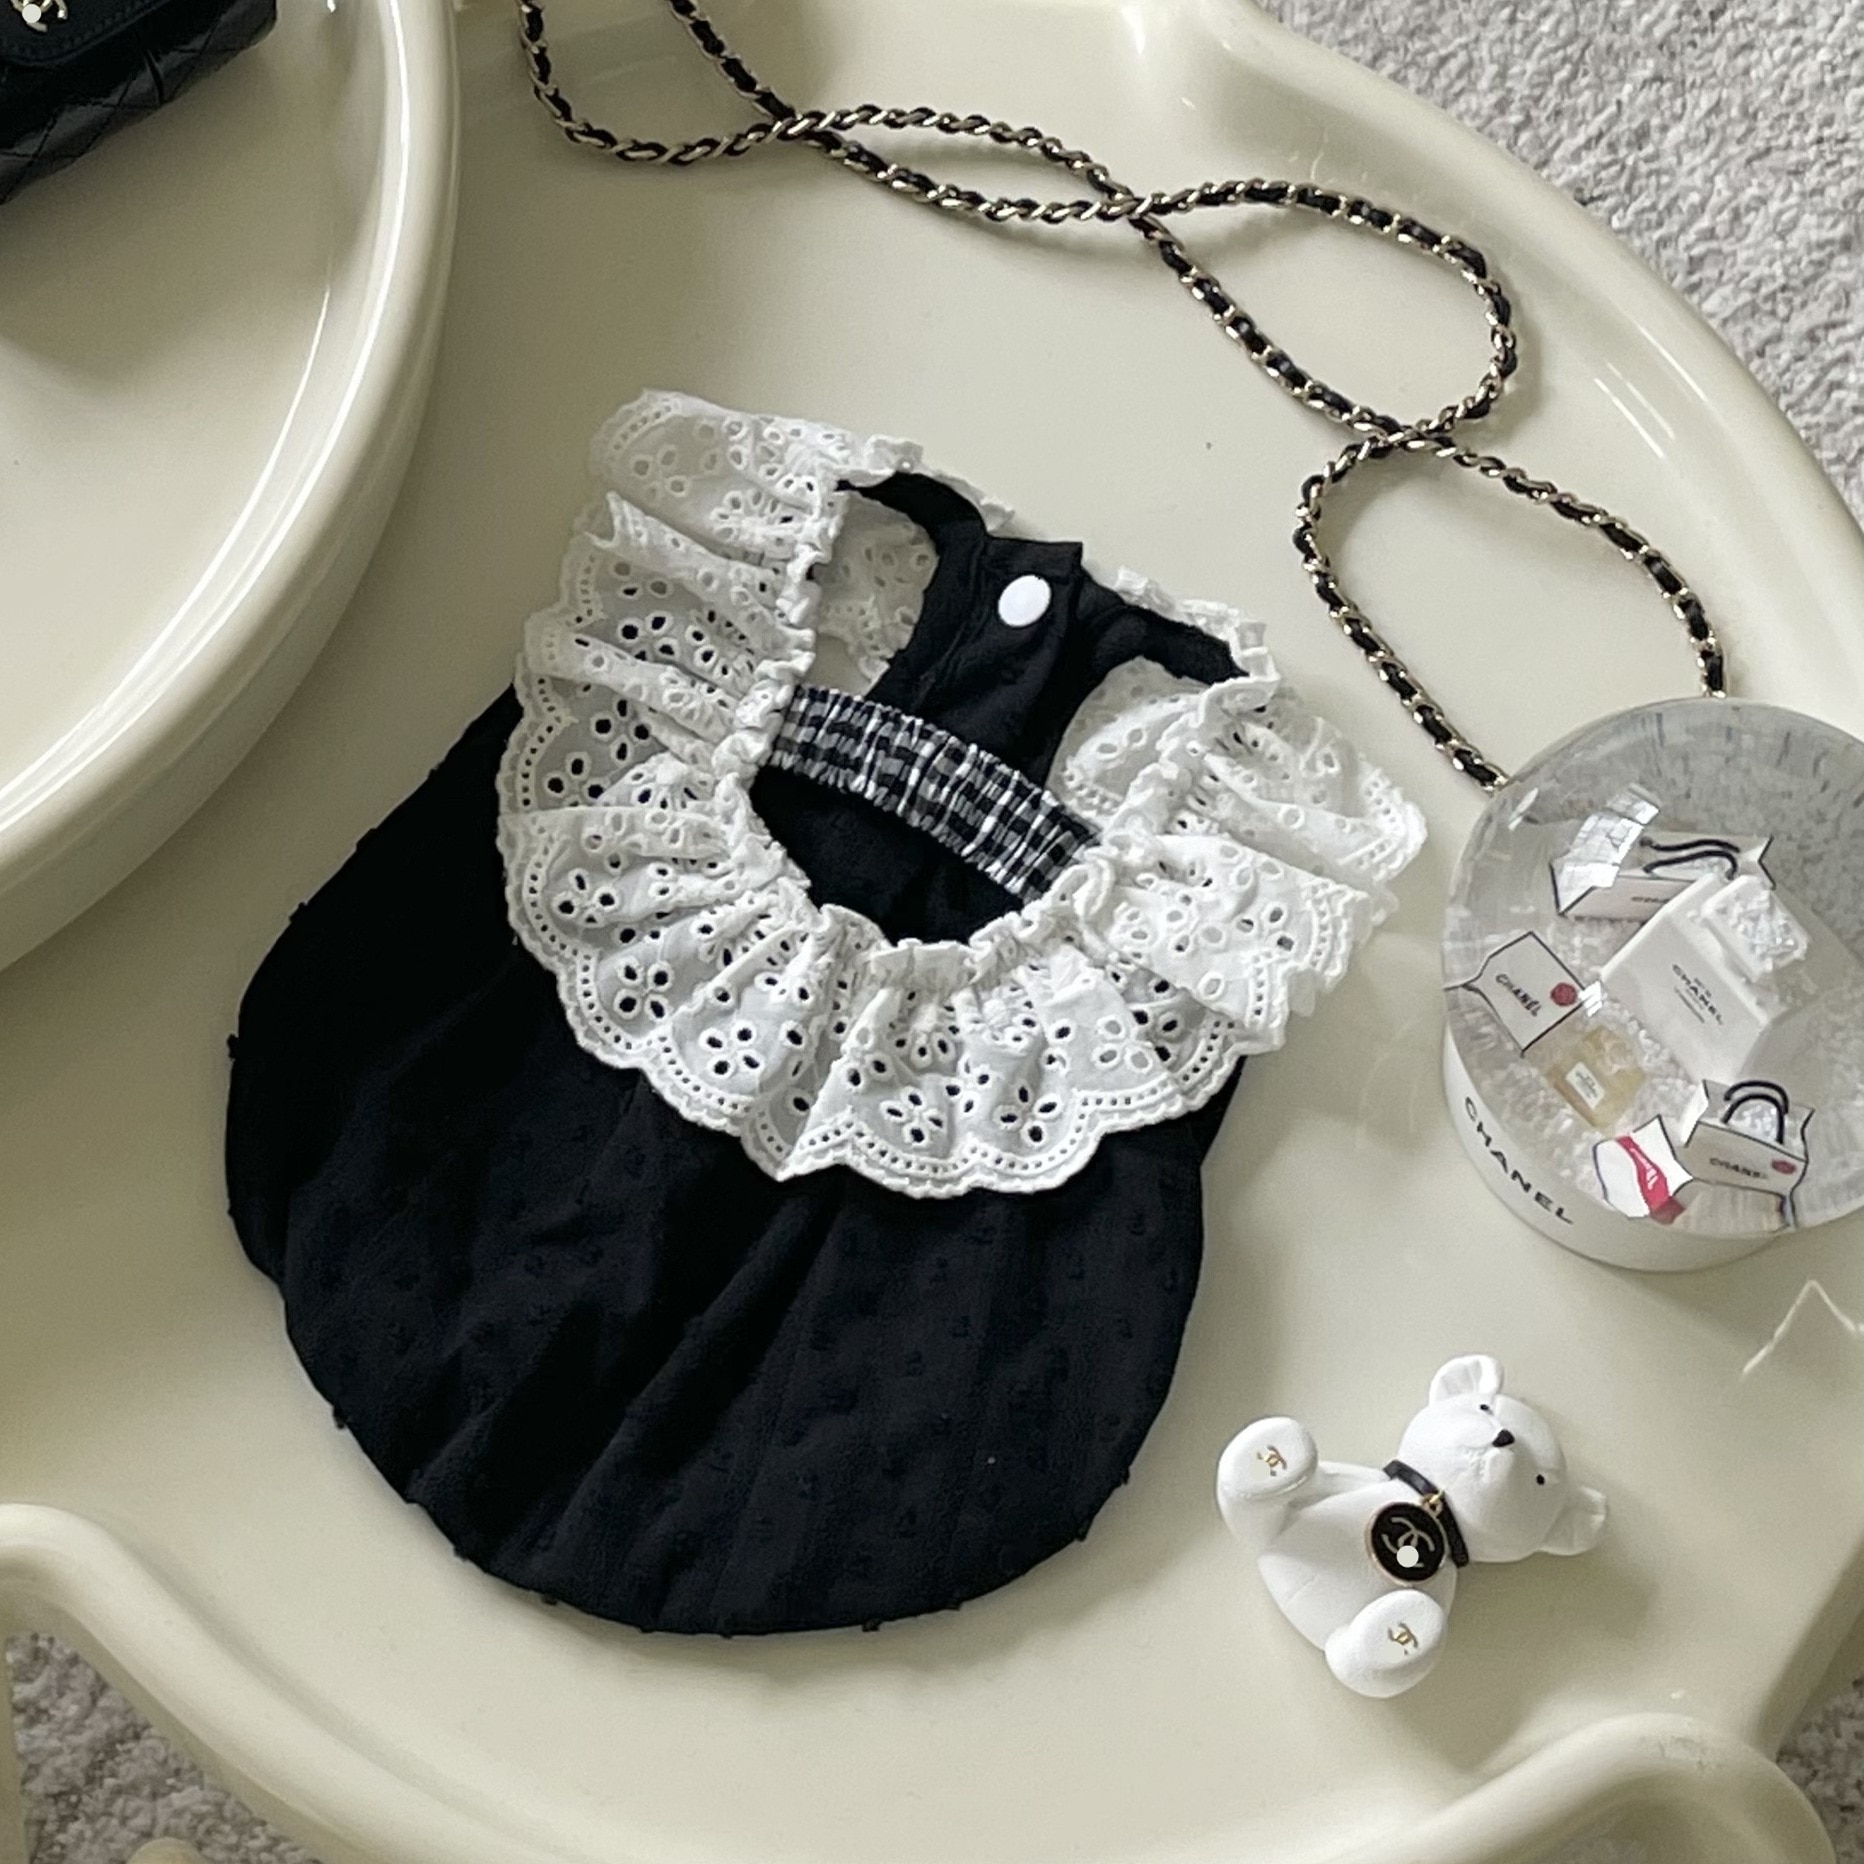 Cute Dress For Dogs With Black And White Color